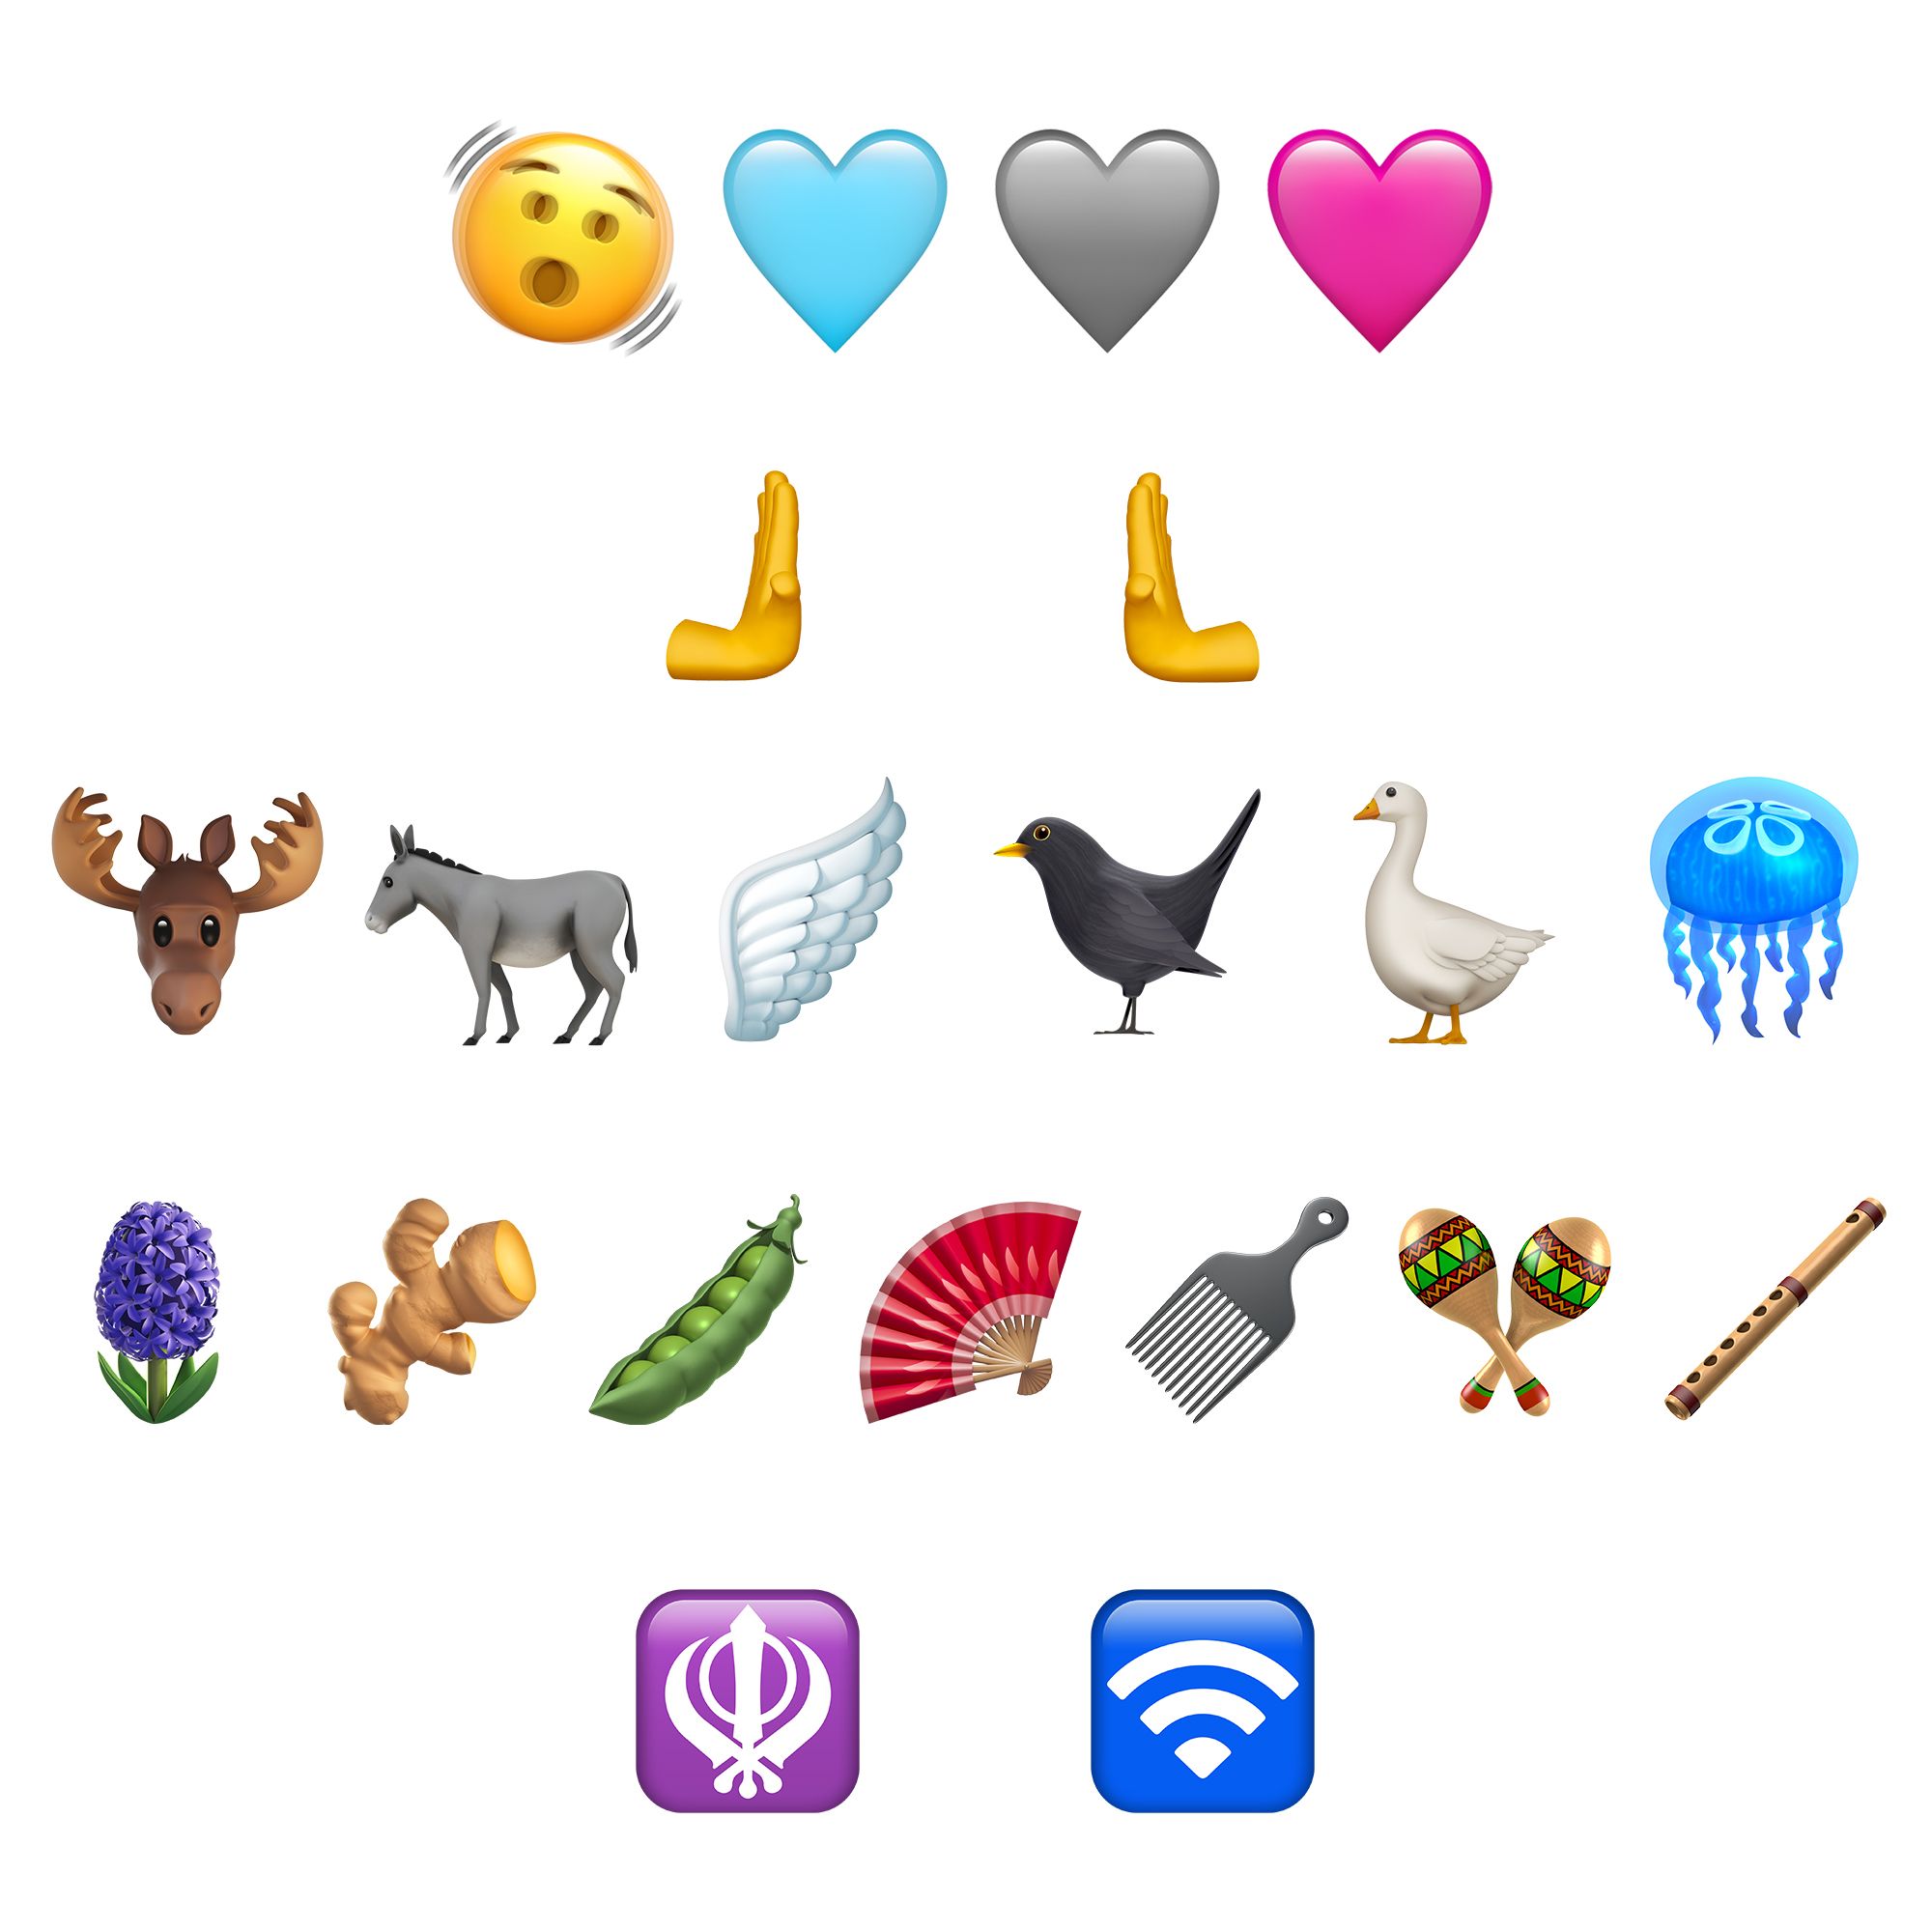 Apple Introduces 21 New Emojis in iOS 16.5, See the Full List Here